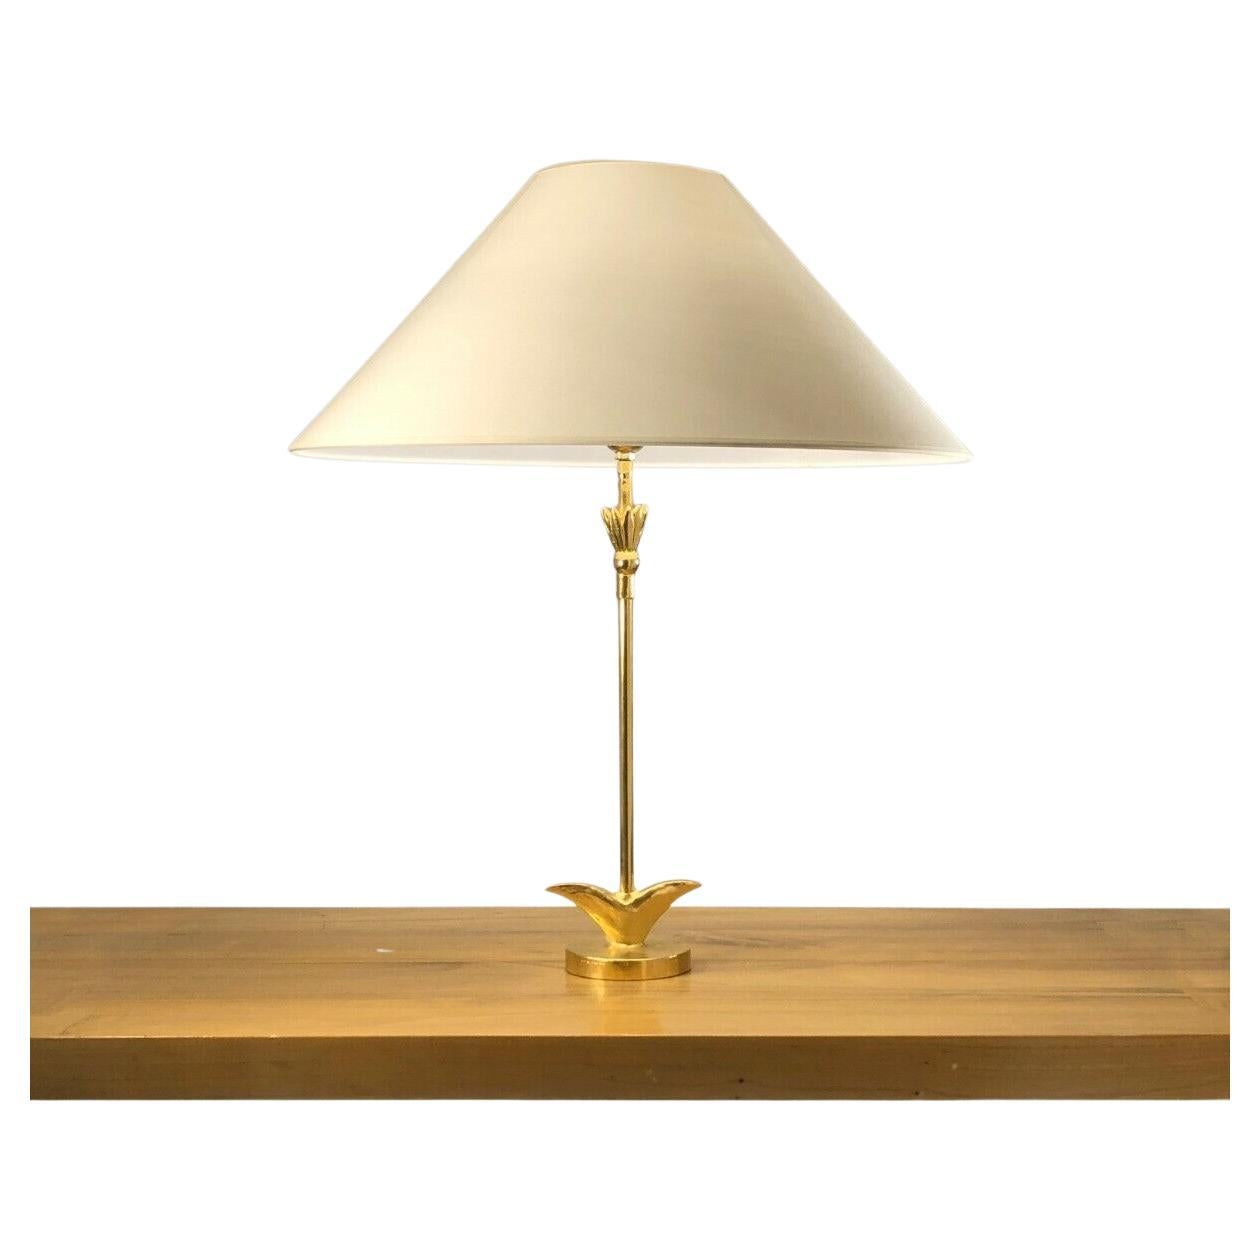 A POST-MODERN Sculptural TABLE LAMP by CAZENOVE, Ed. FONDICA, 1980-1990 For Sale